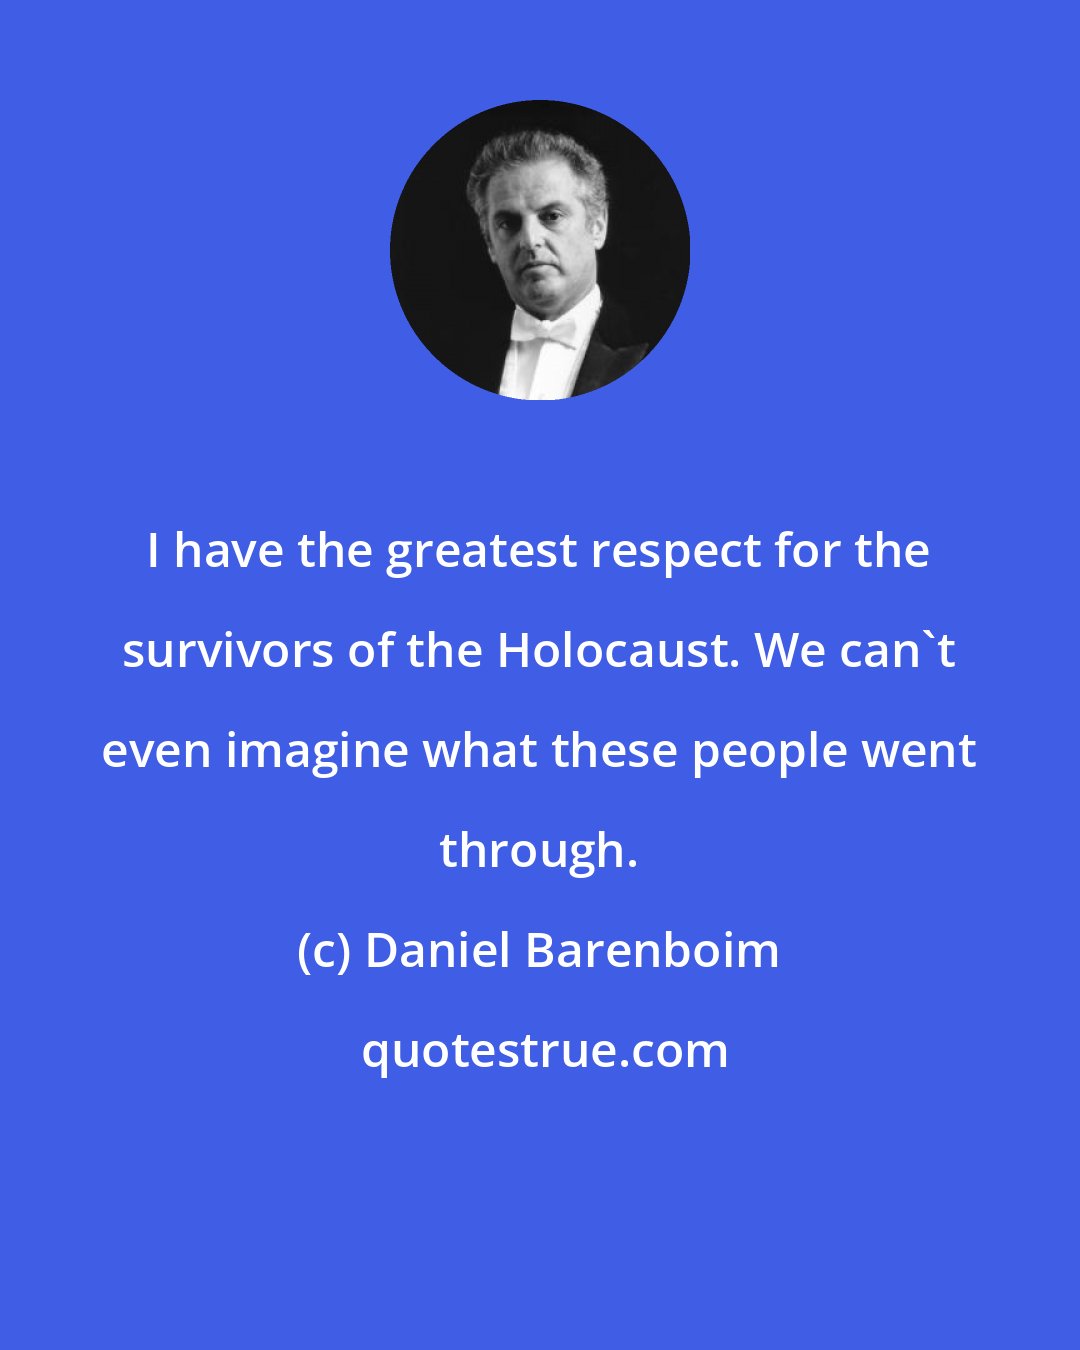 Daniel Barenboim: I have the greatest respect for the survivors of the Holocaust. We can't even imagine what these people went through.